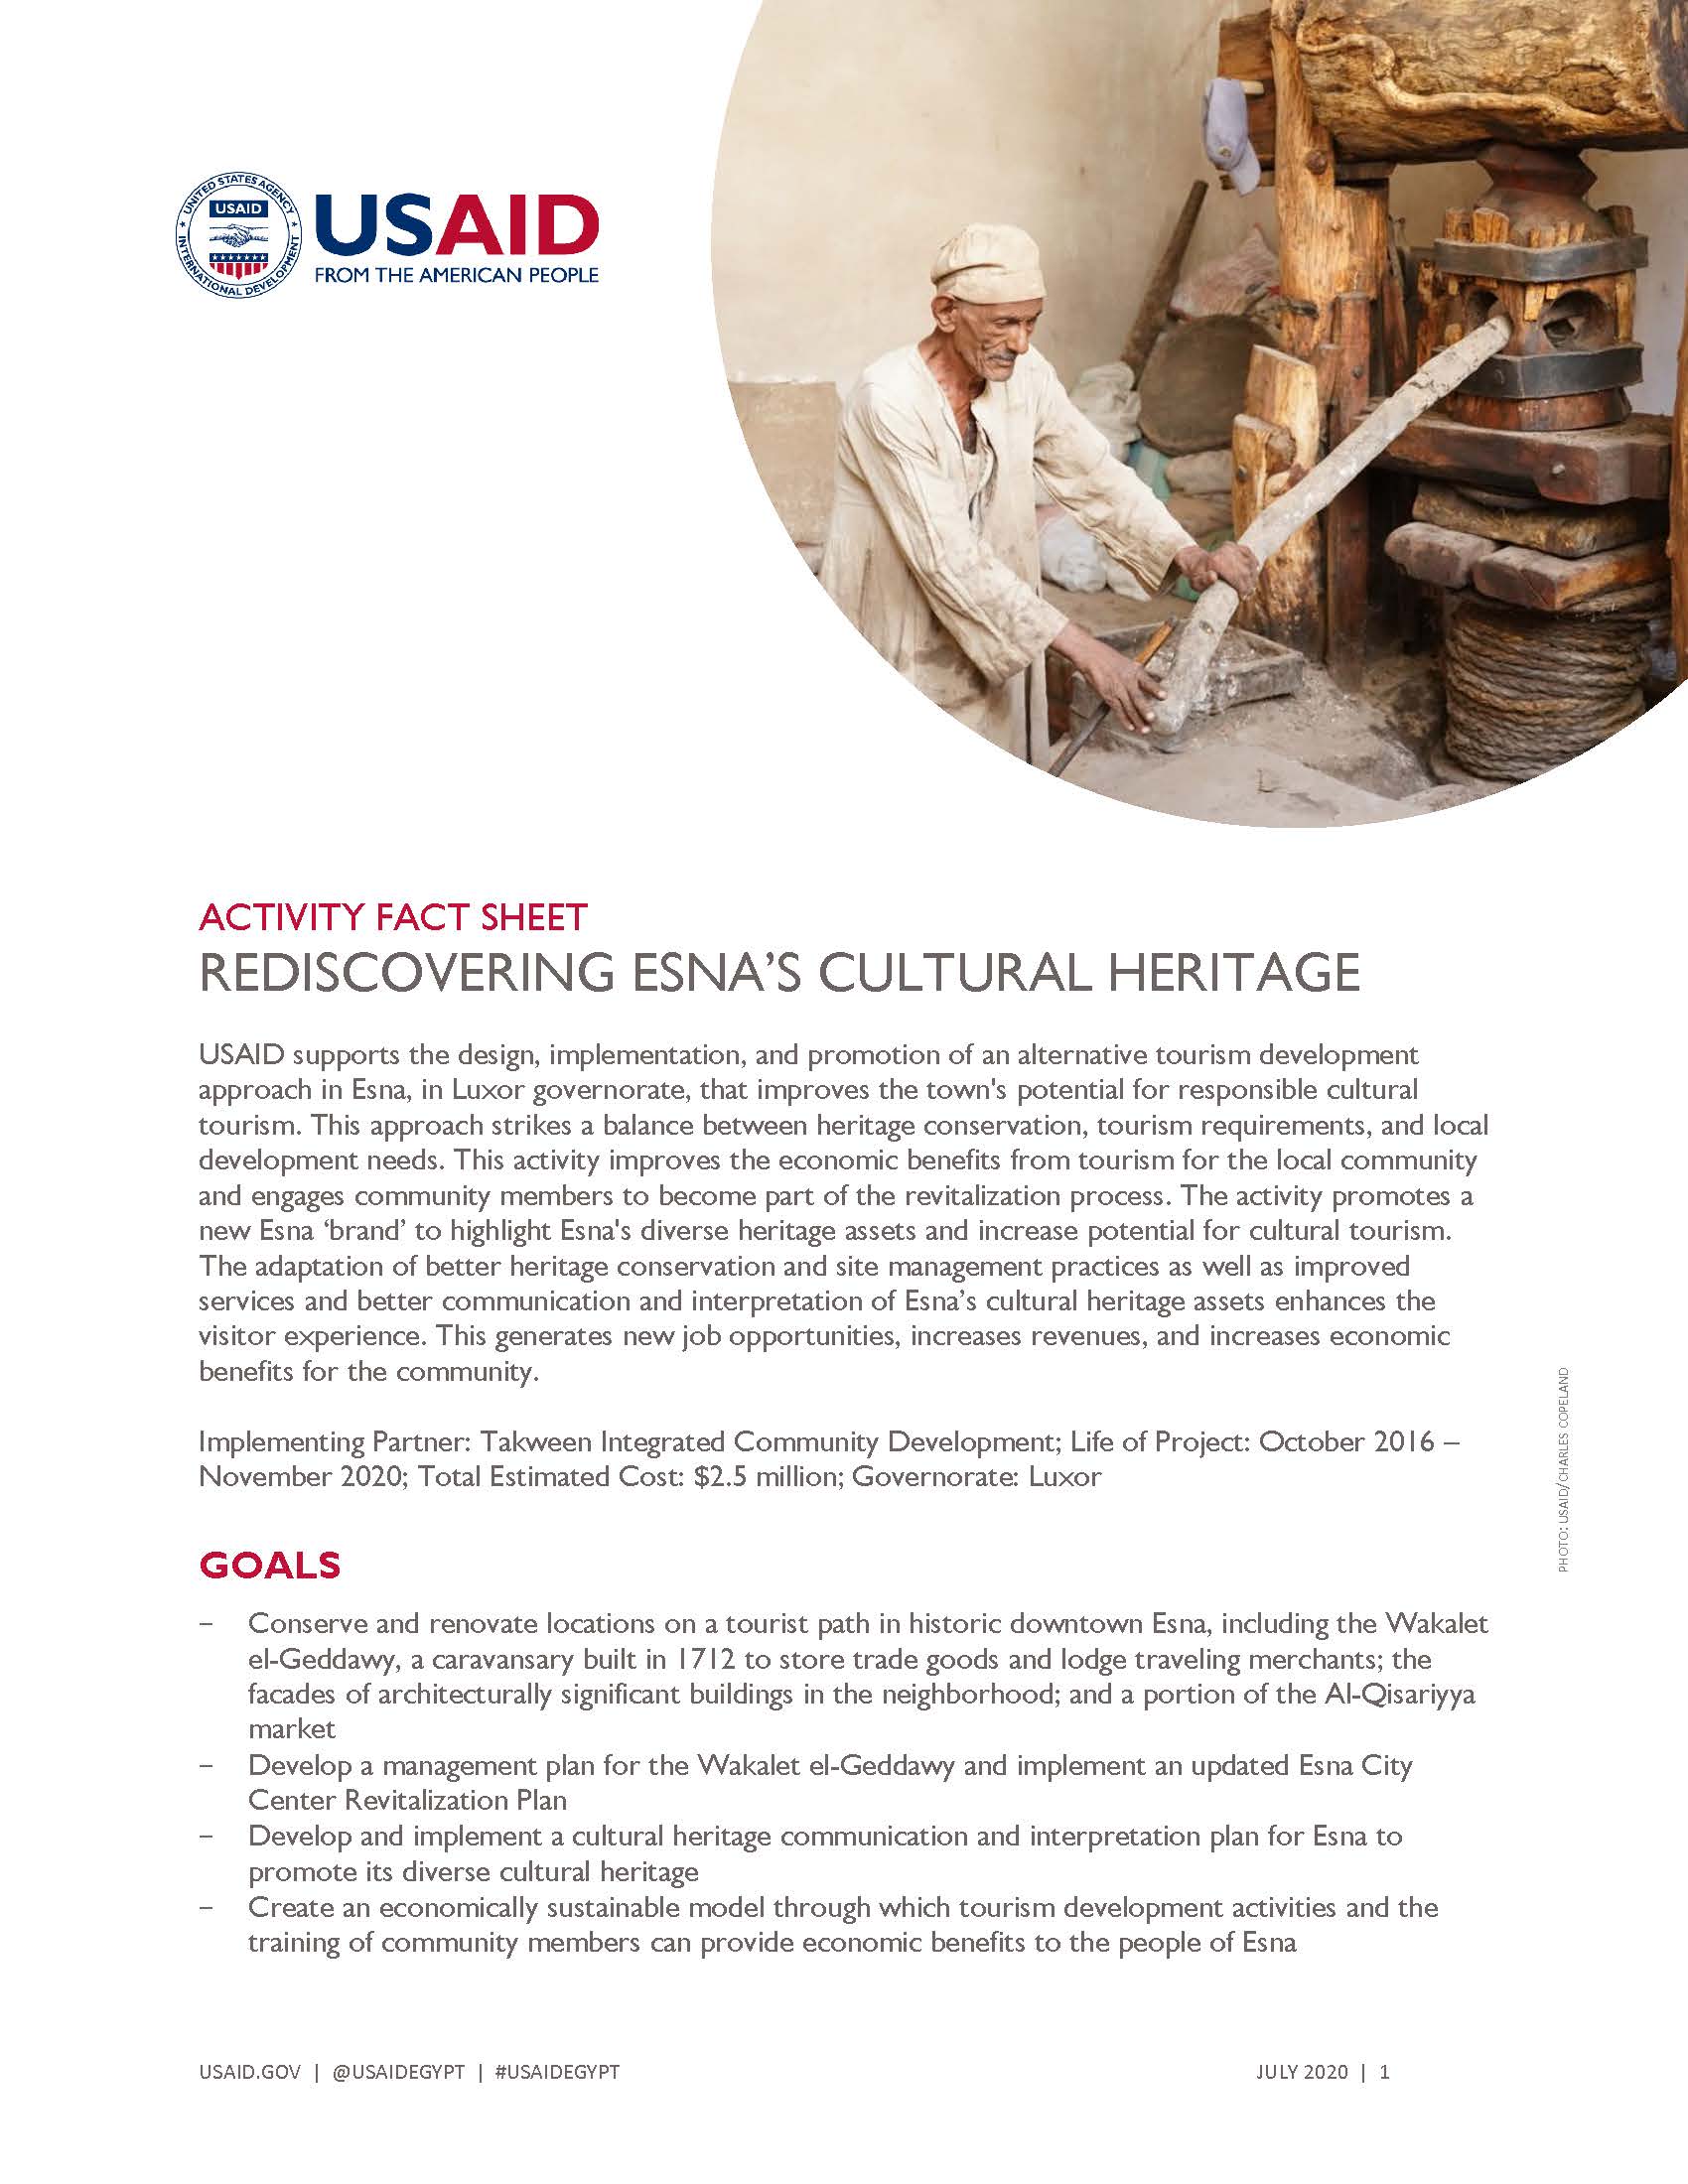 USAID/Egypt Activity Fact Sheet: Rediscovering Esna’s Cultural Heritage 